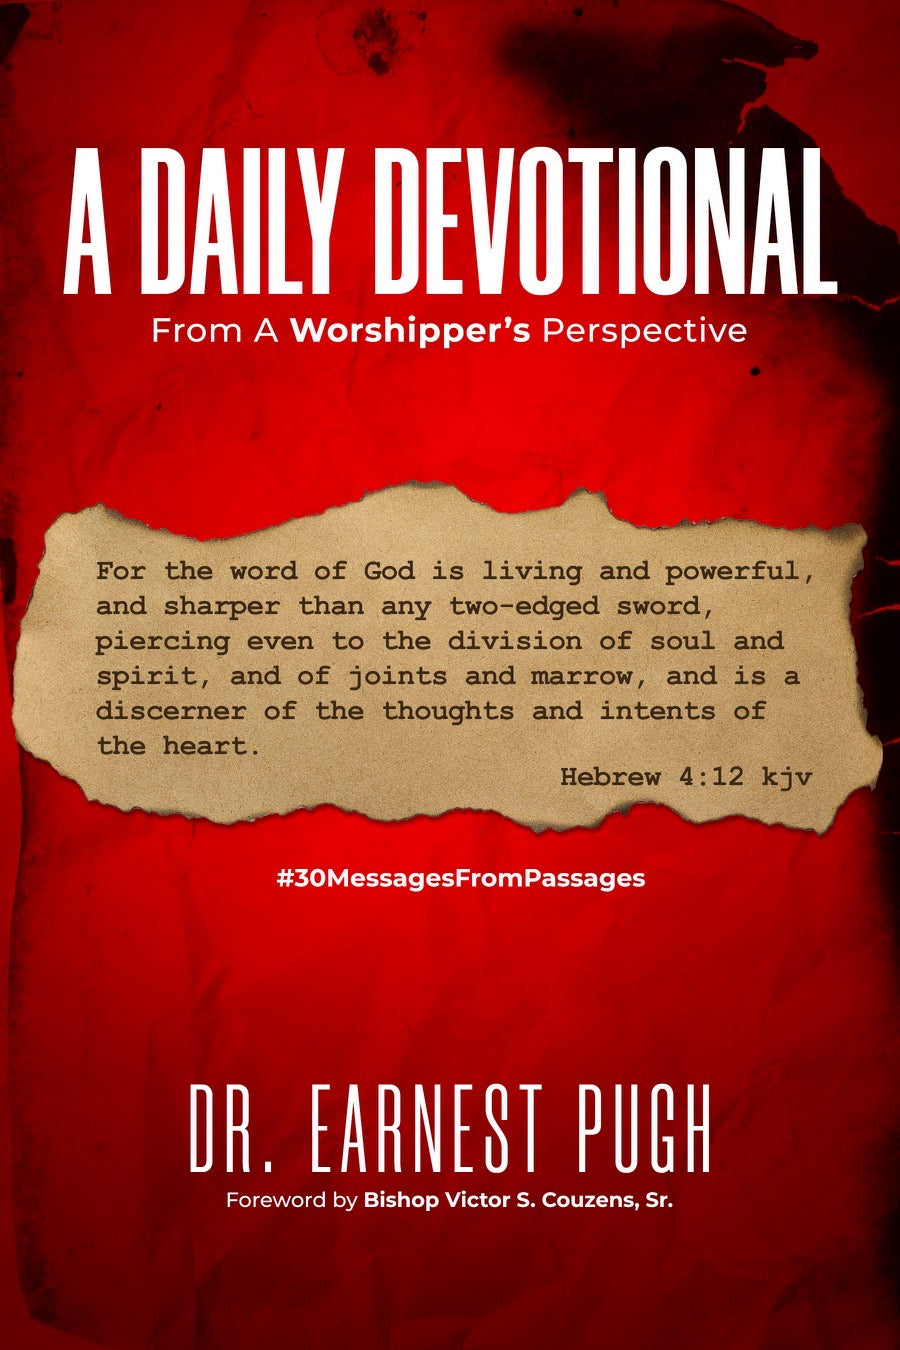 A Daily Devotional: From A Worshipper's Perspective